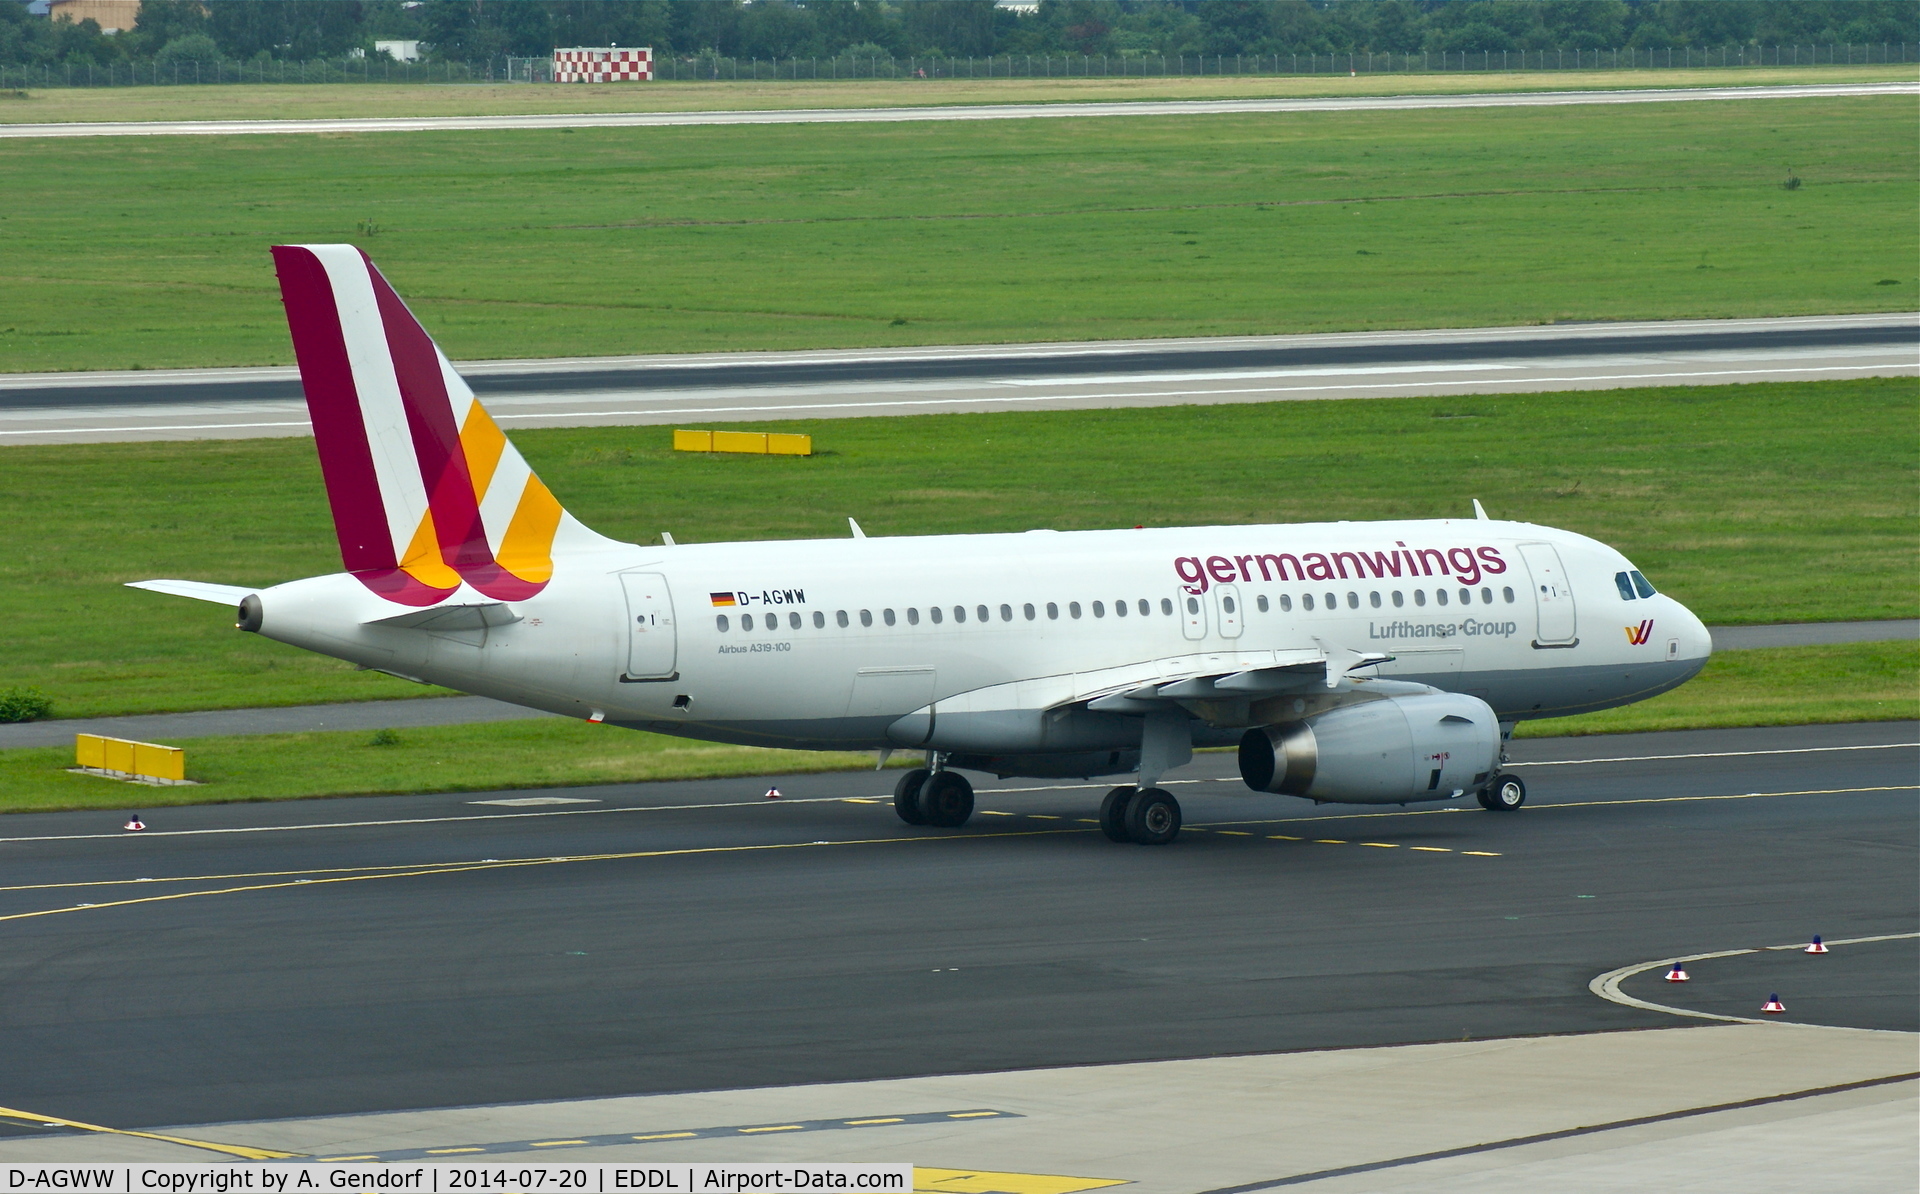 D-AGWW, 2013 Airbus A319-132 C/N 5535, Germanwings, is here on the taxiway at Düsseldorf Int'l(EDDL)